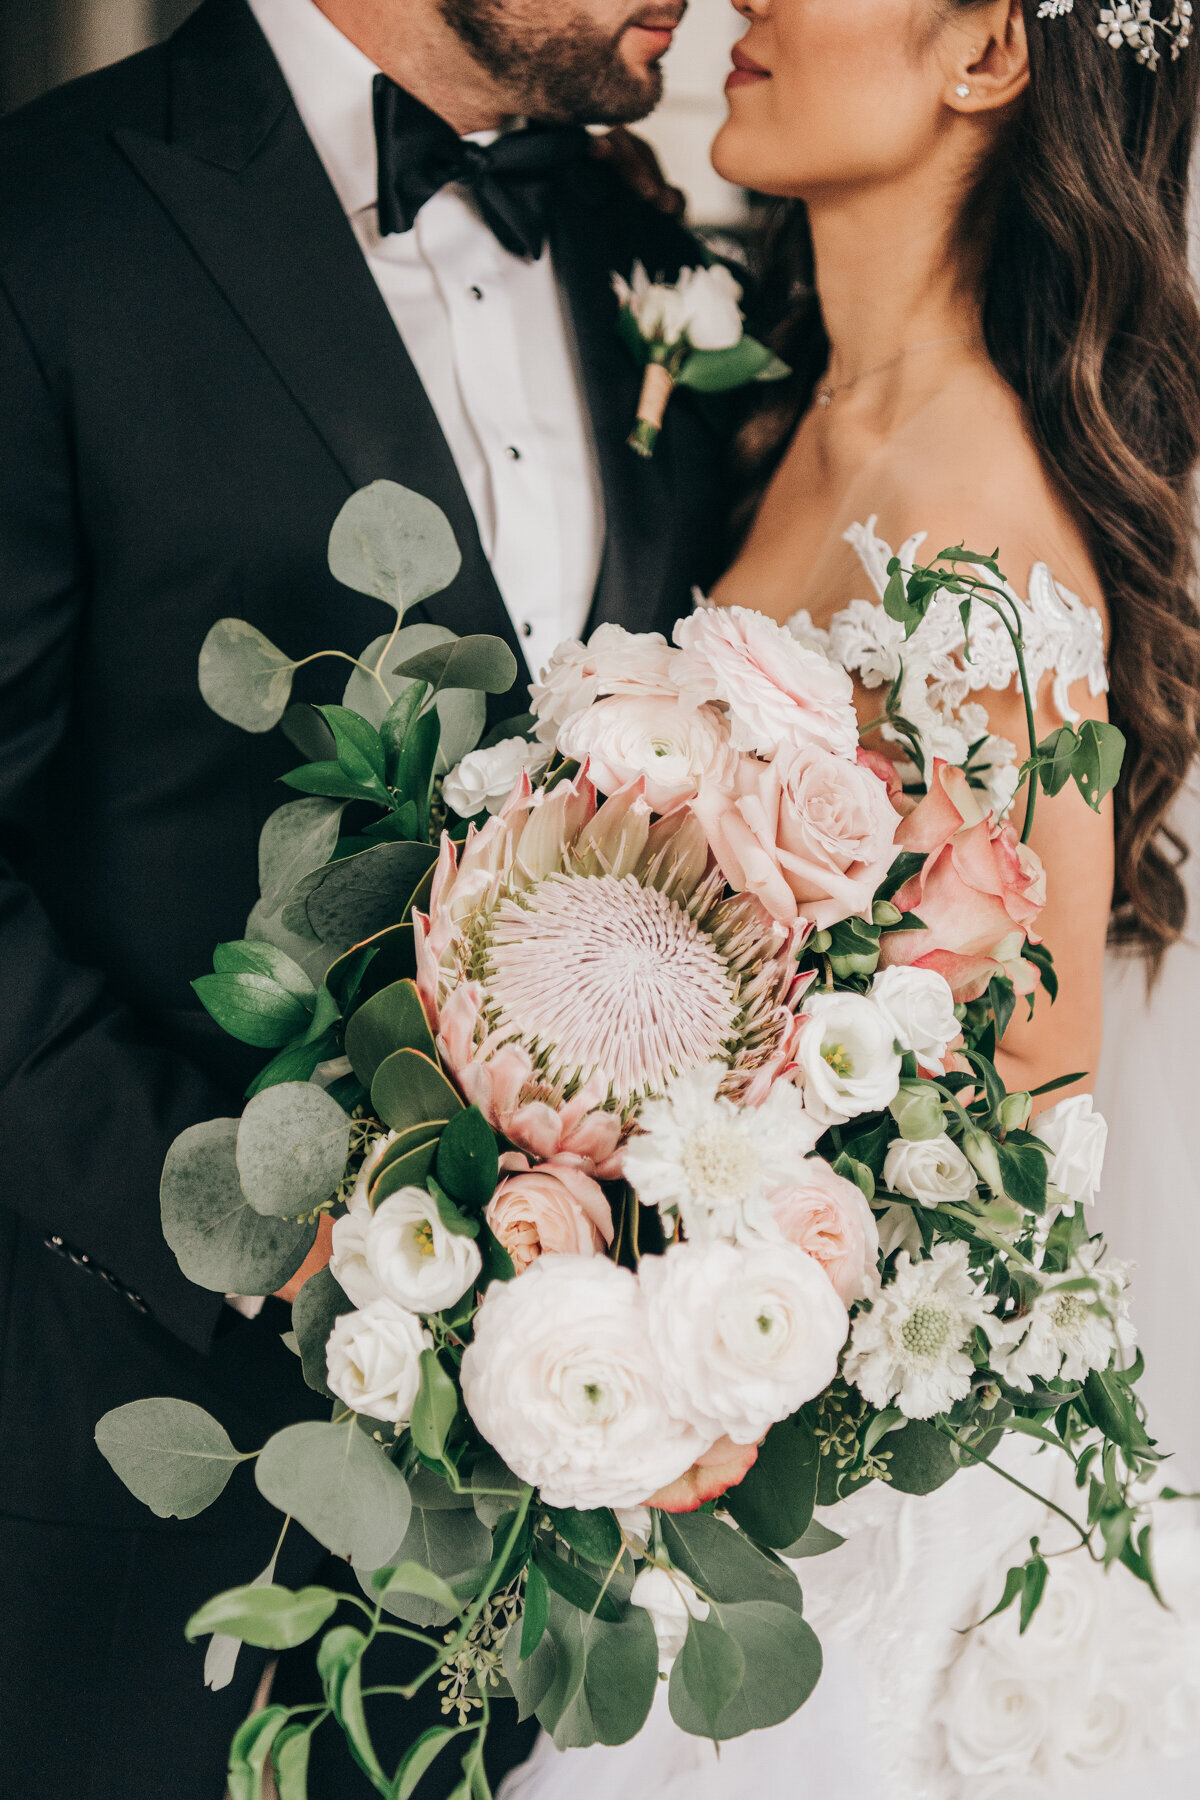 Glamorous bouquet of eucalyptus, chrysanthemums, and roses